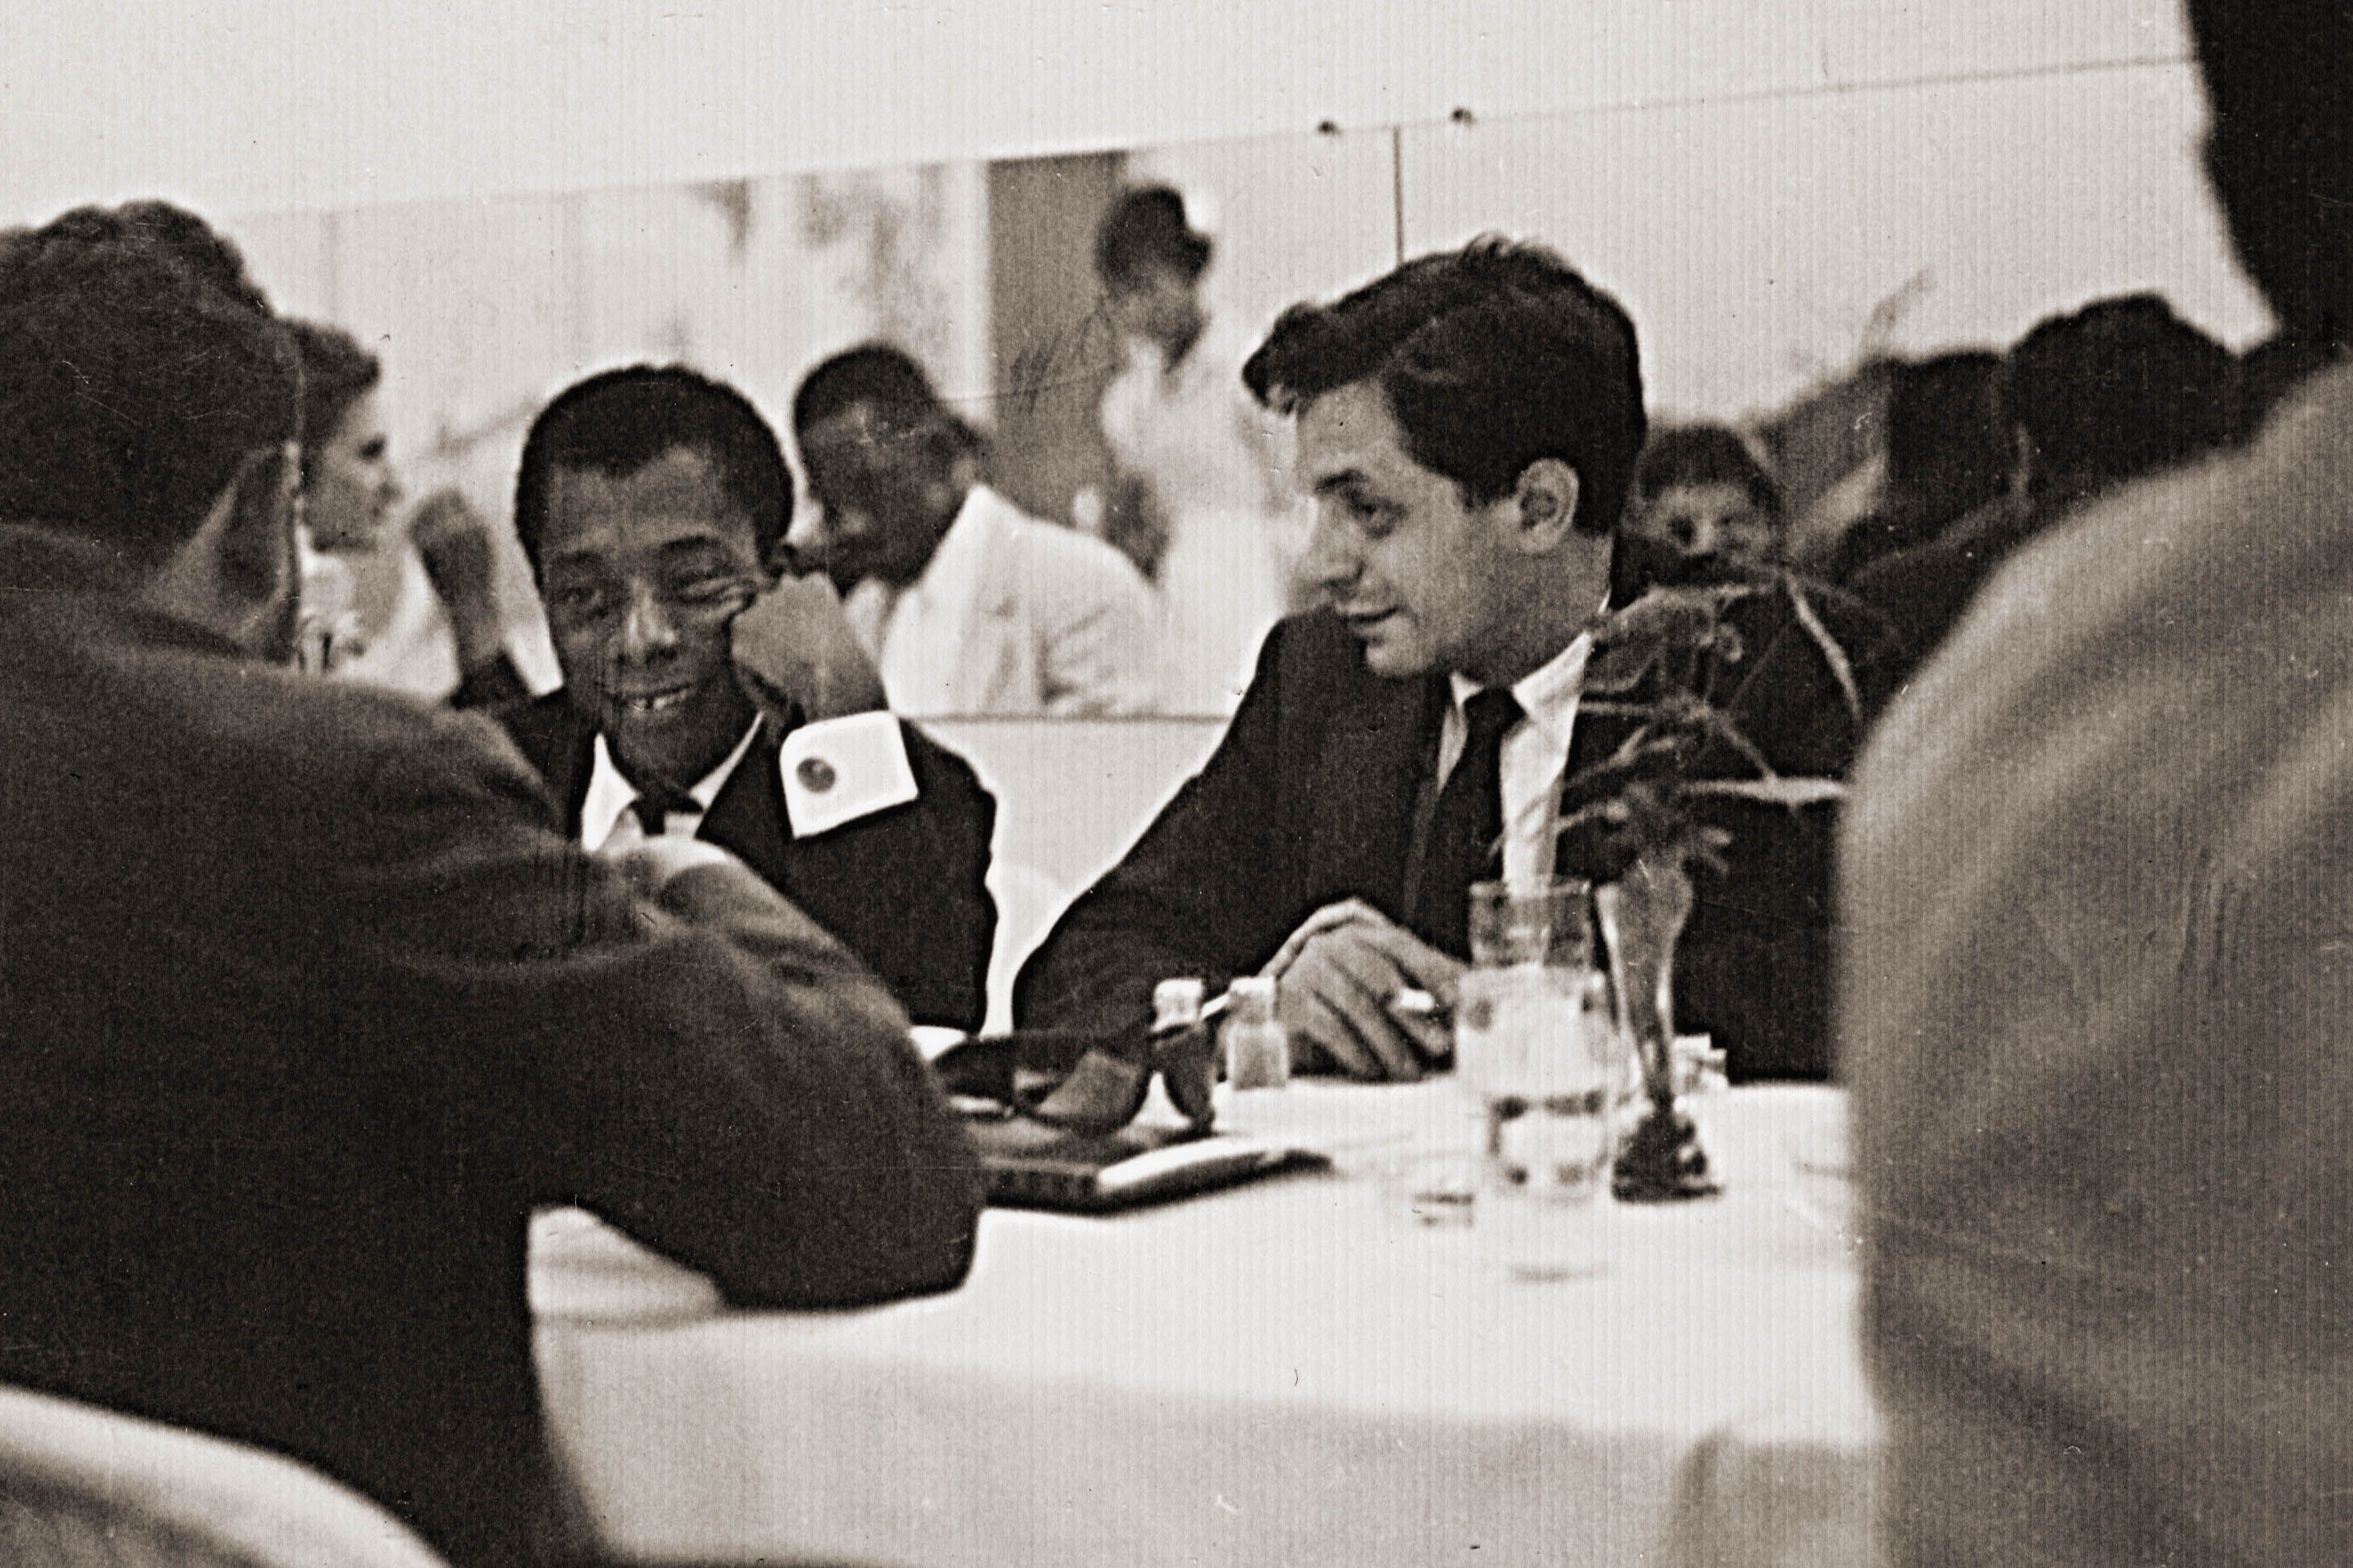 James Baldwin, left, and Paul A. Greenberg helped with the 1963 Salute to Freedom benefit concert near Birmingham, Alabama. Photo by Robert Adamenko.